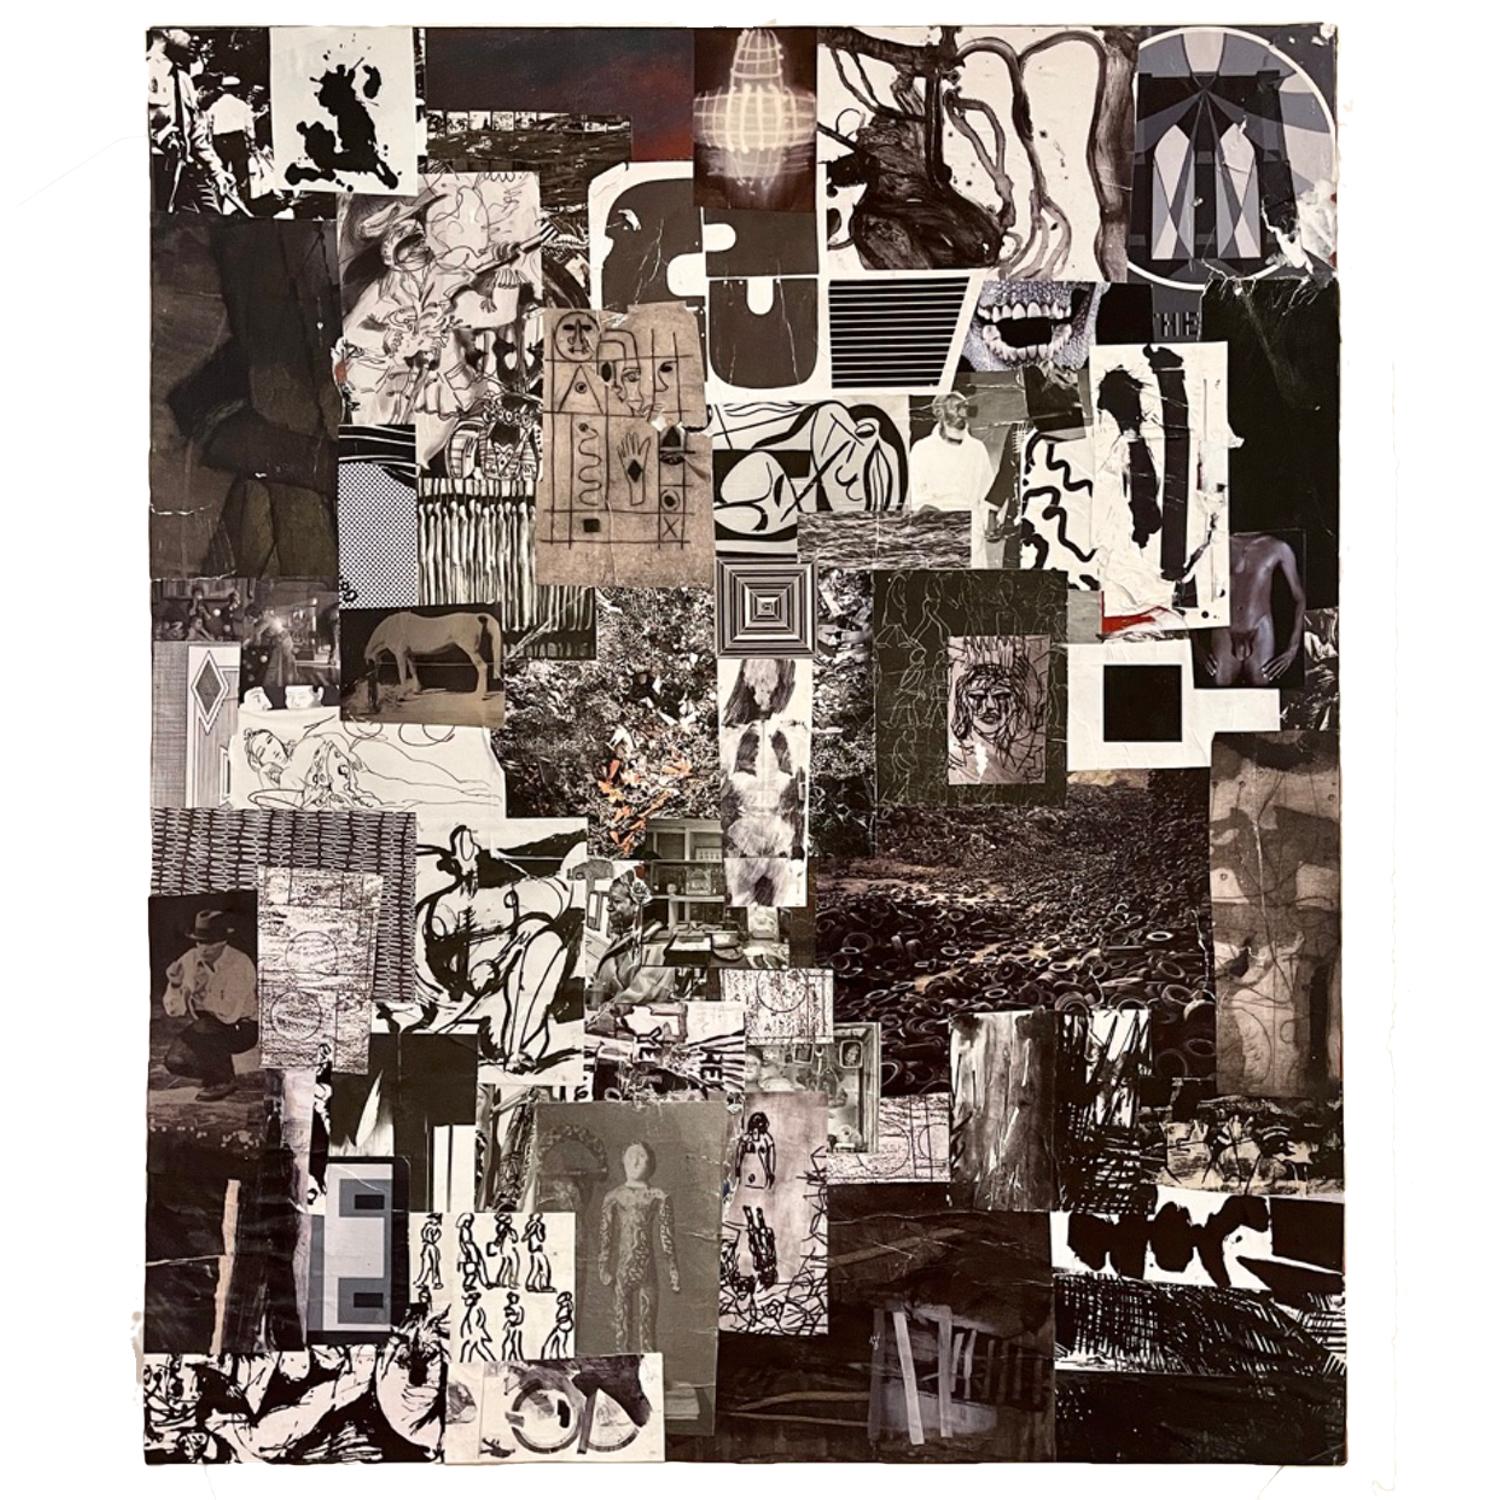 Black & White Collage on Board w. a Touch of Red - Mixed Media Art by (After) Robert Rauschenberg